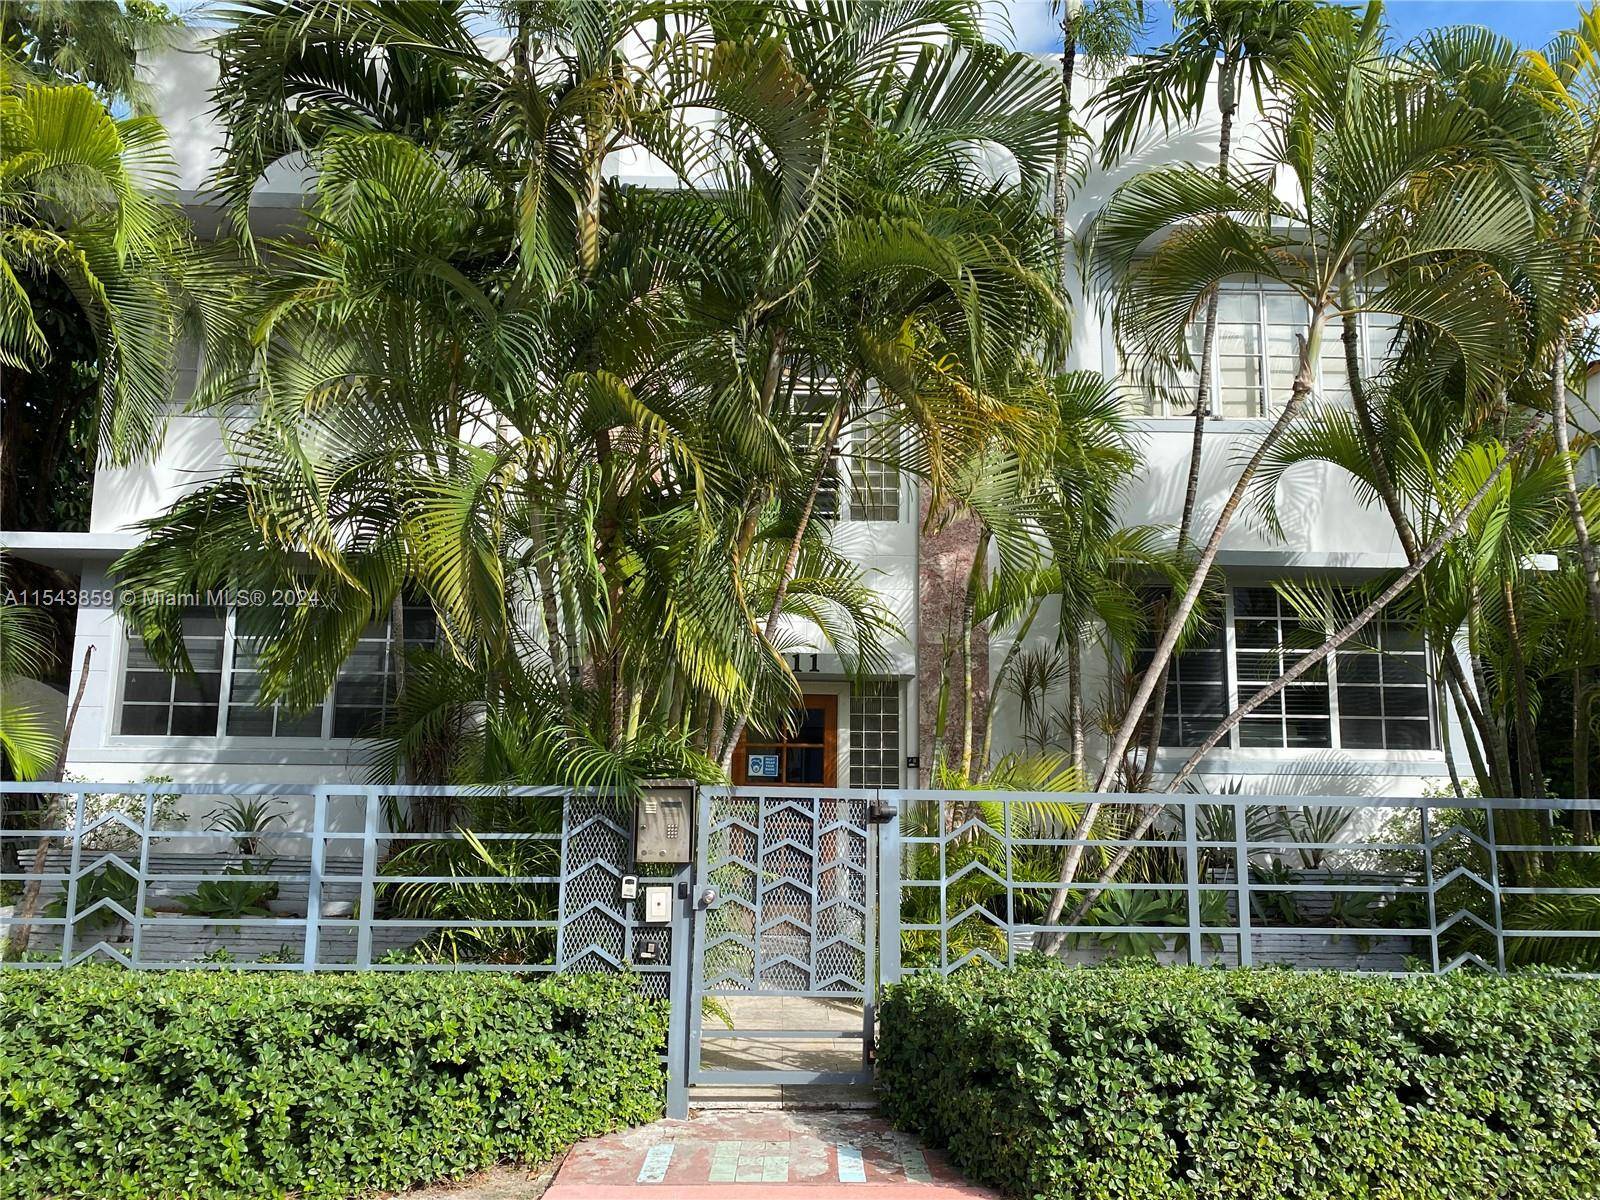 Bright corner unit just steps away from Lincoln Rd, located in a quiet residential street.